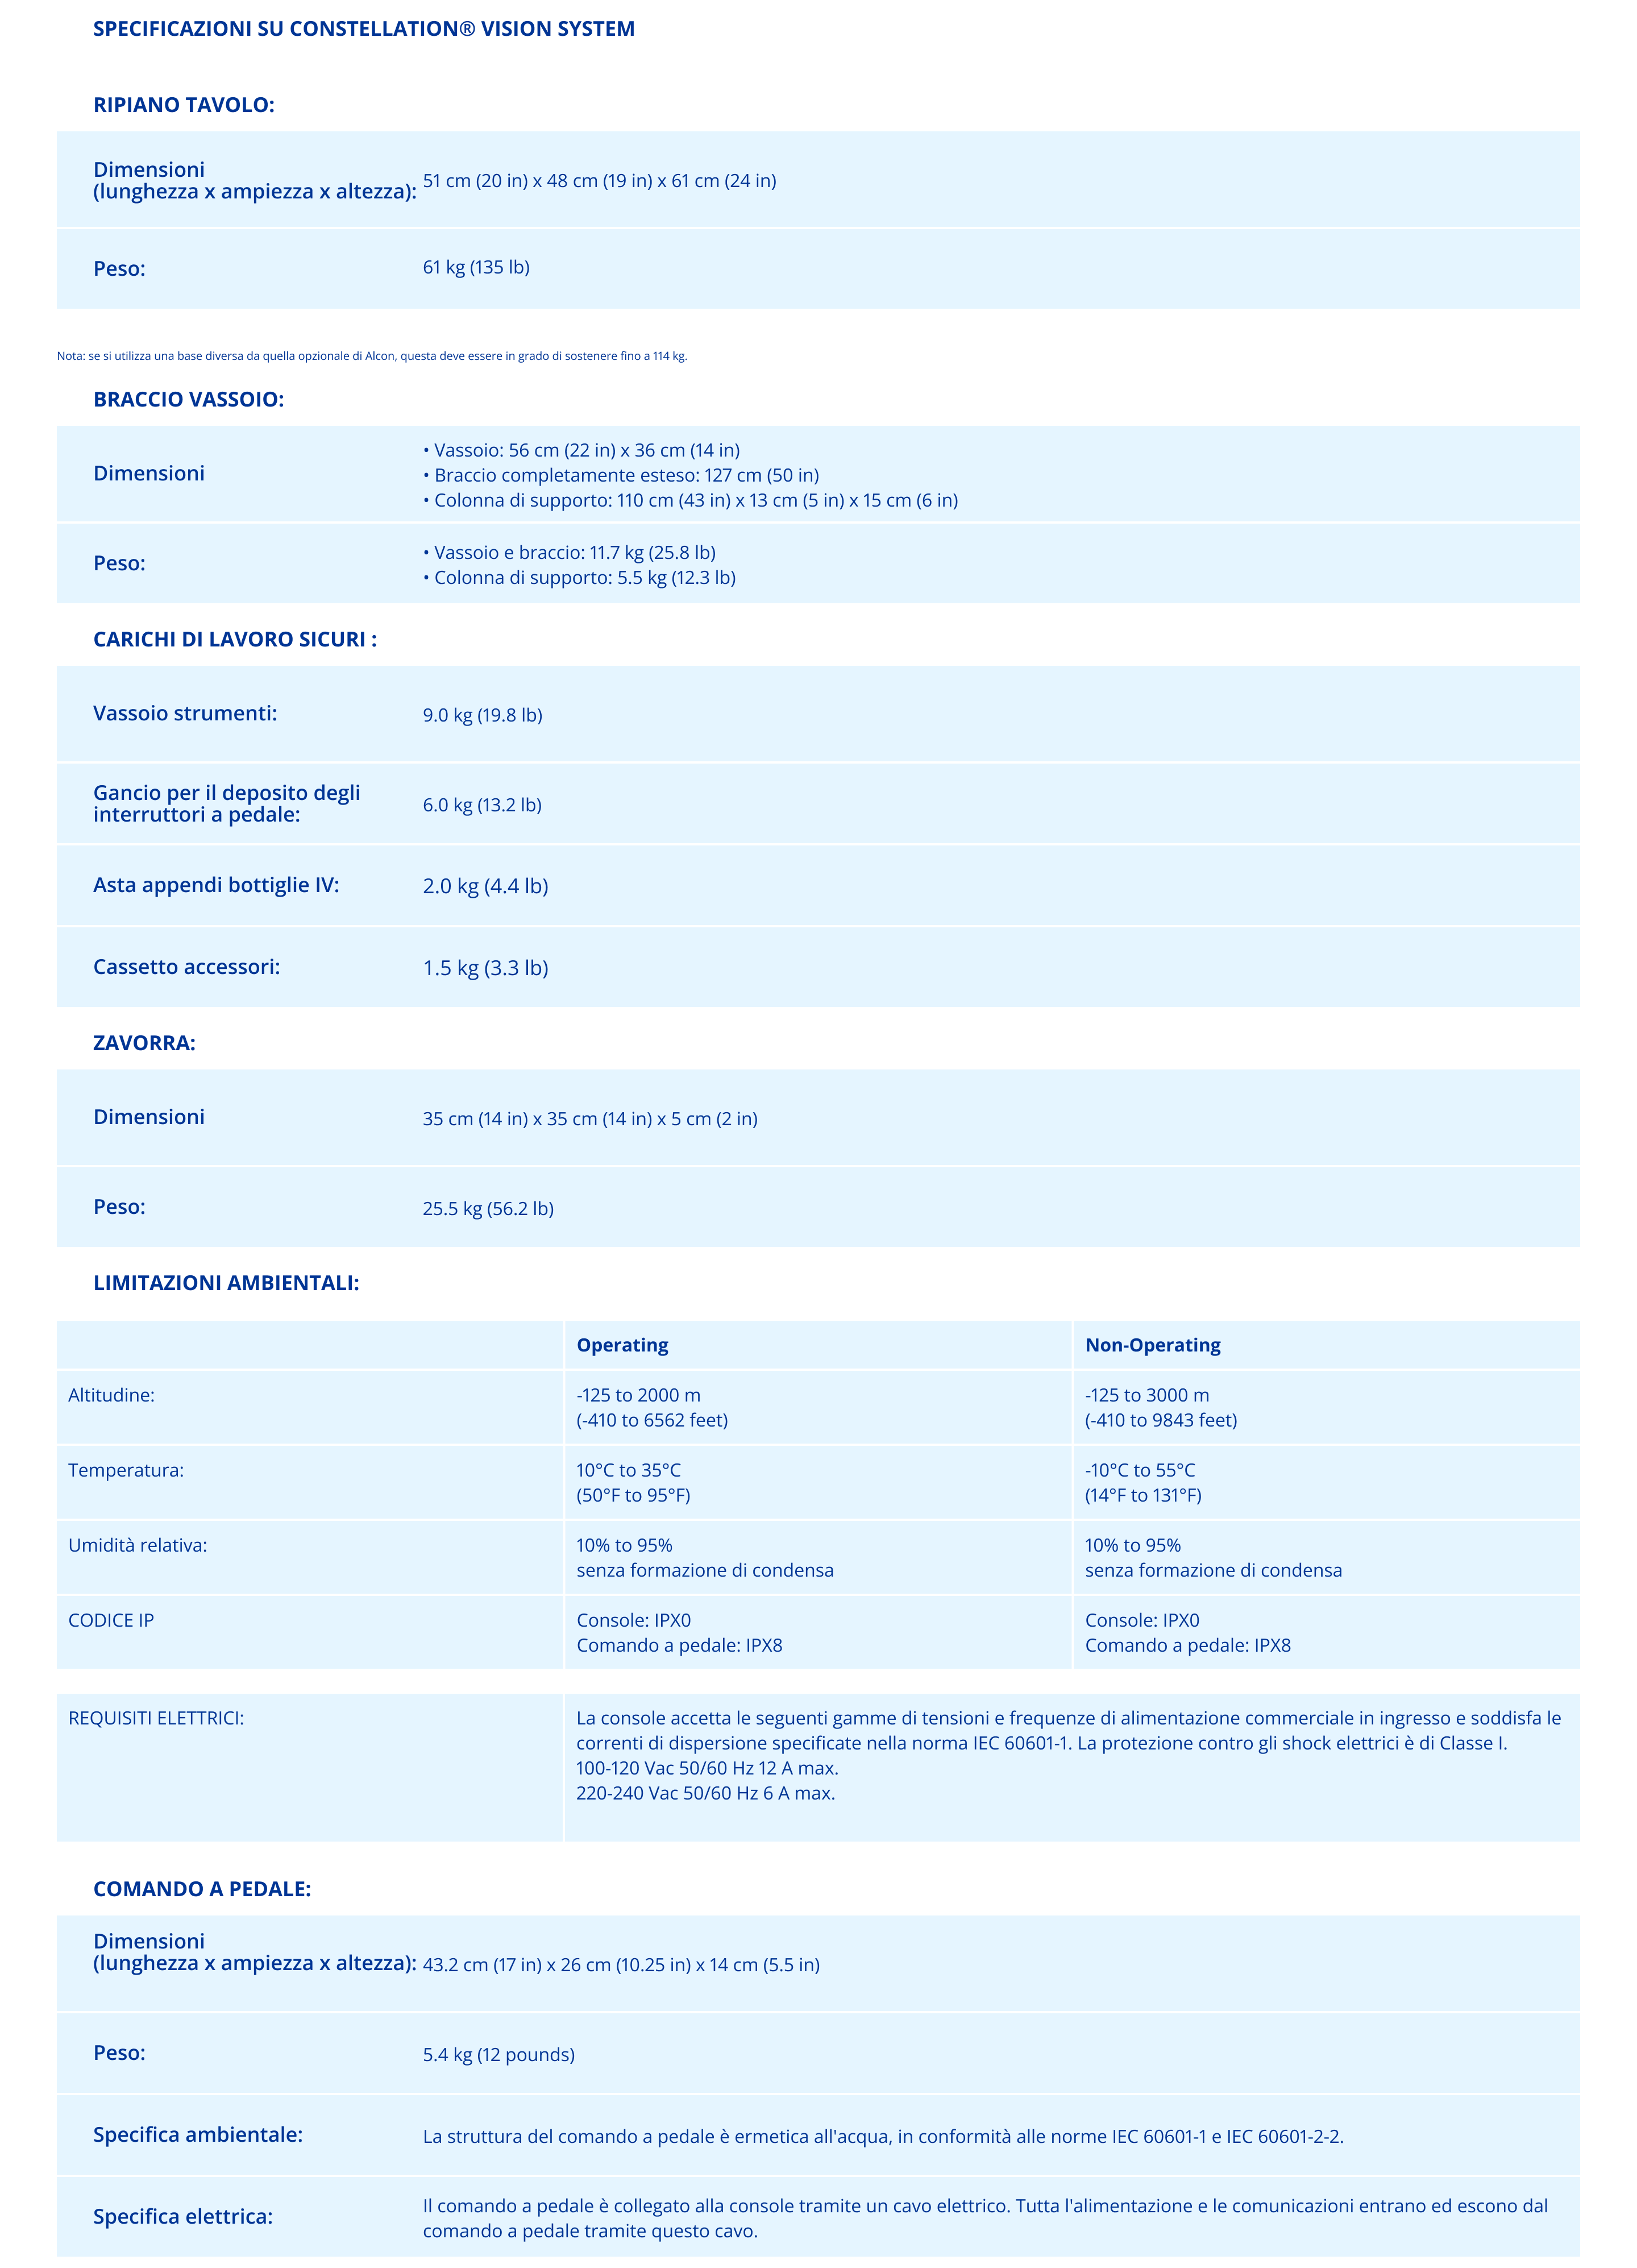 table CONSTELLATION Vision System Specifications